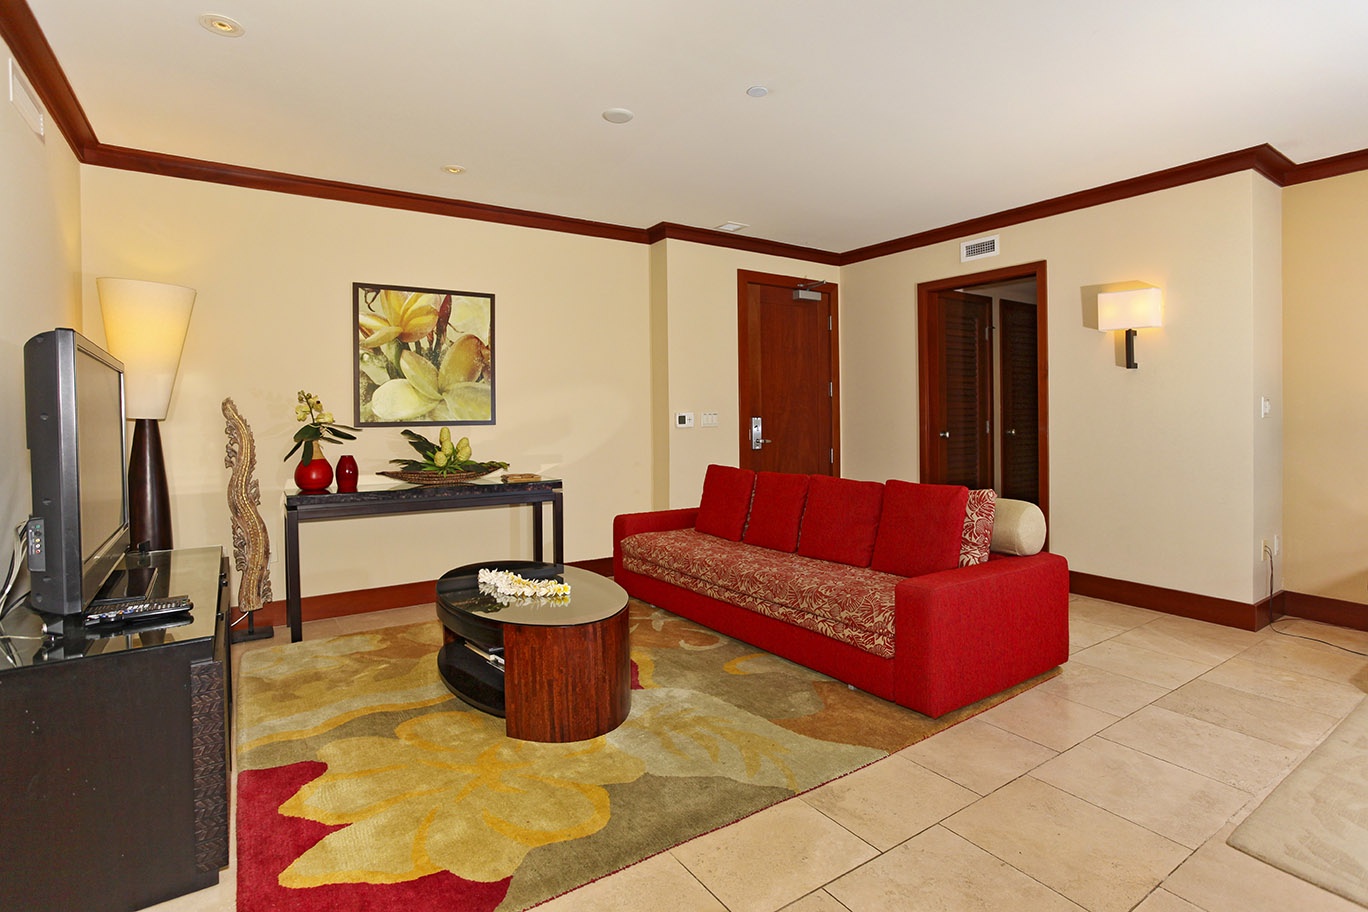 Kapolei Vacation Rentals, Ko Olina Beach Villas B204 - We welcome you to the island with vibrant living room decor.